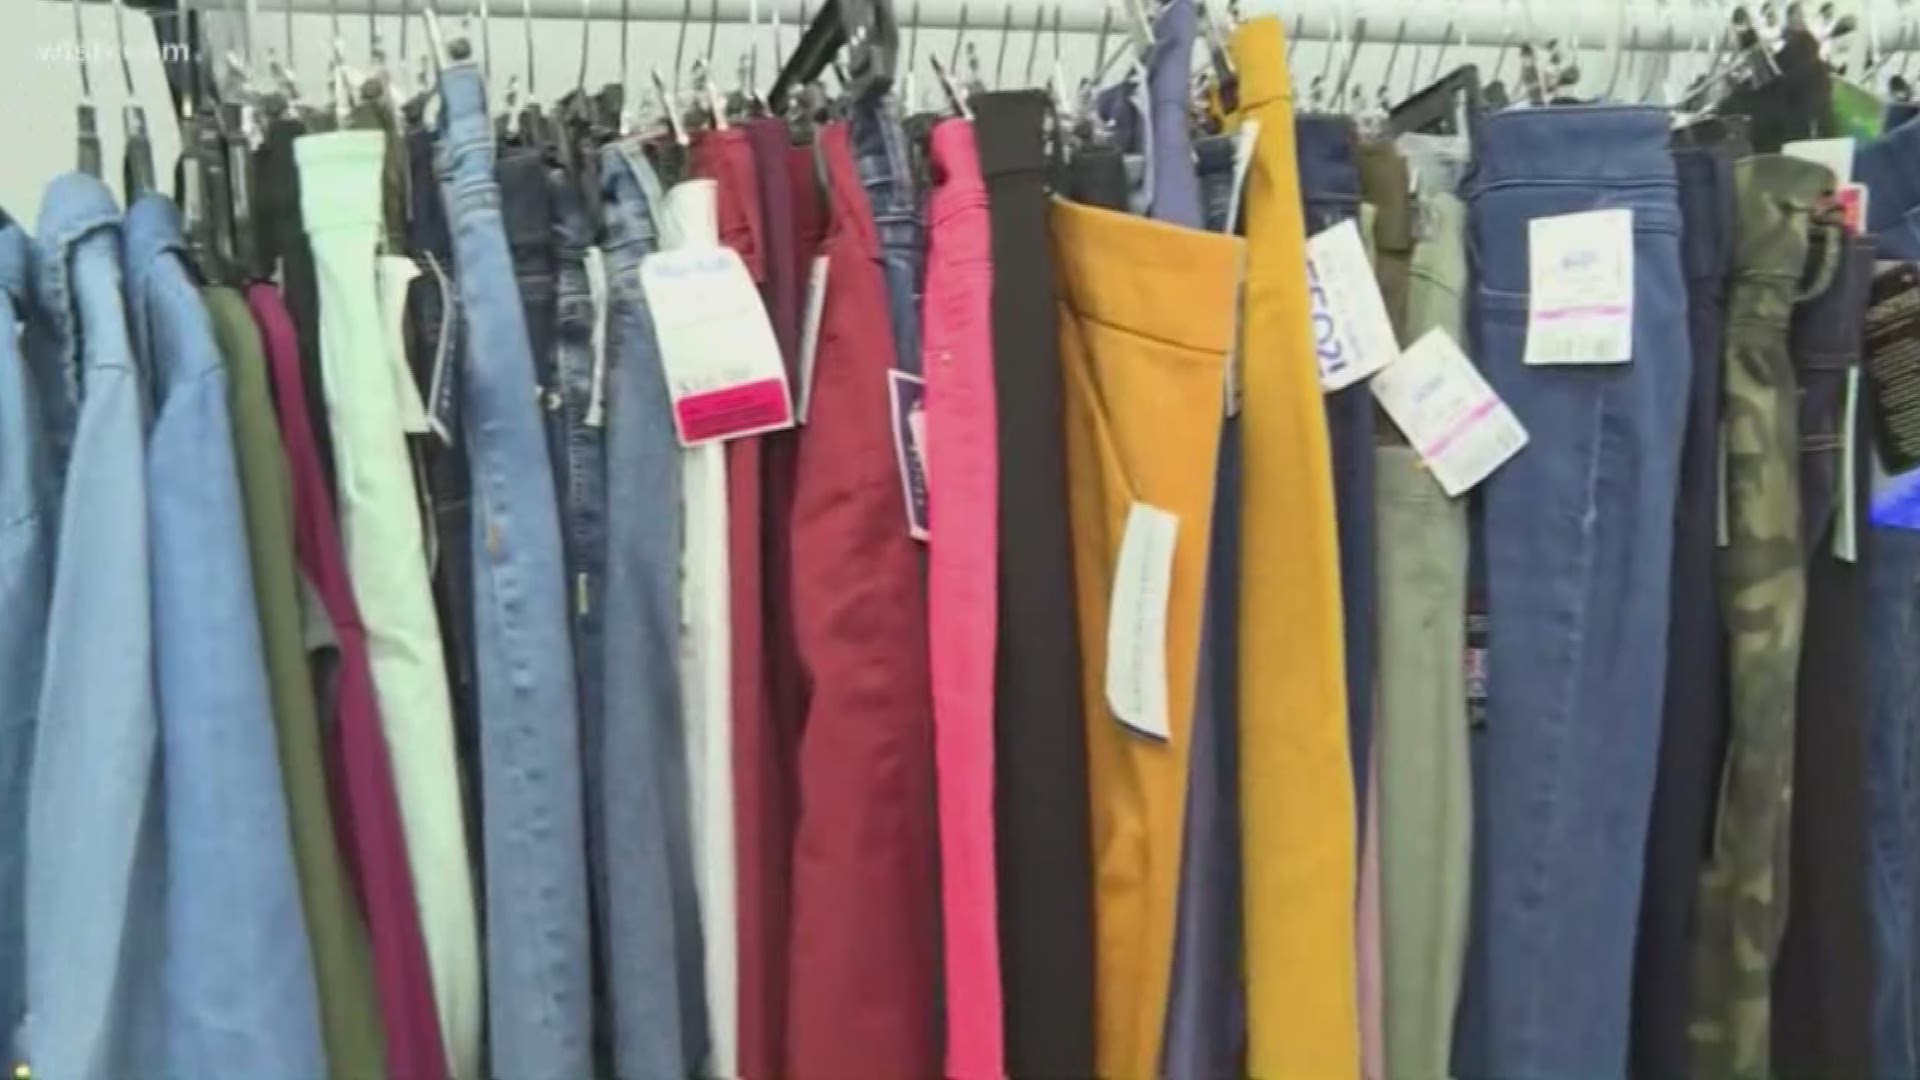 Tenoroc High School has been able to help more than a dozen students in the few weeks the free closet has been open.